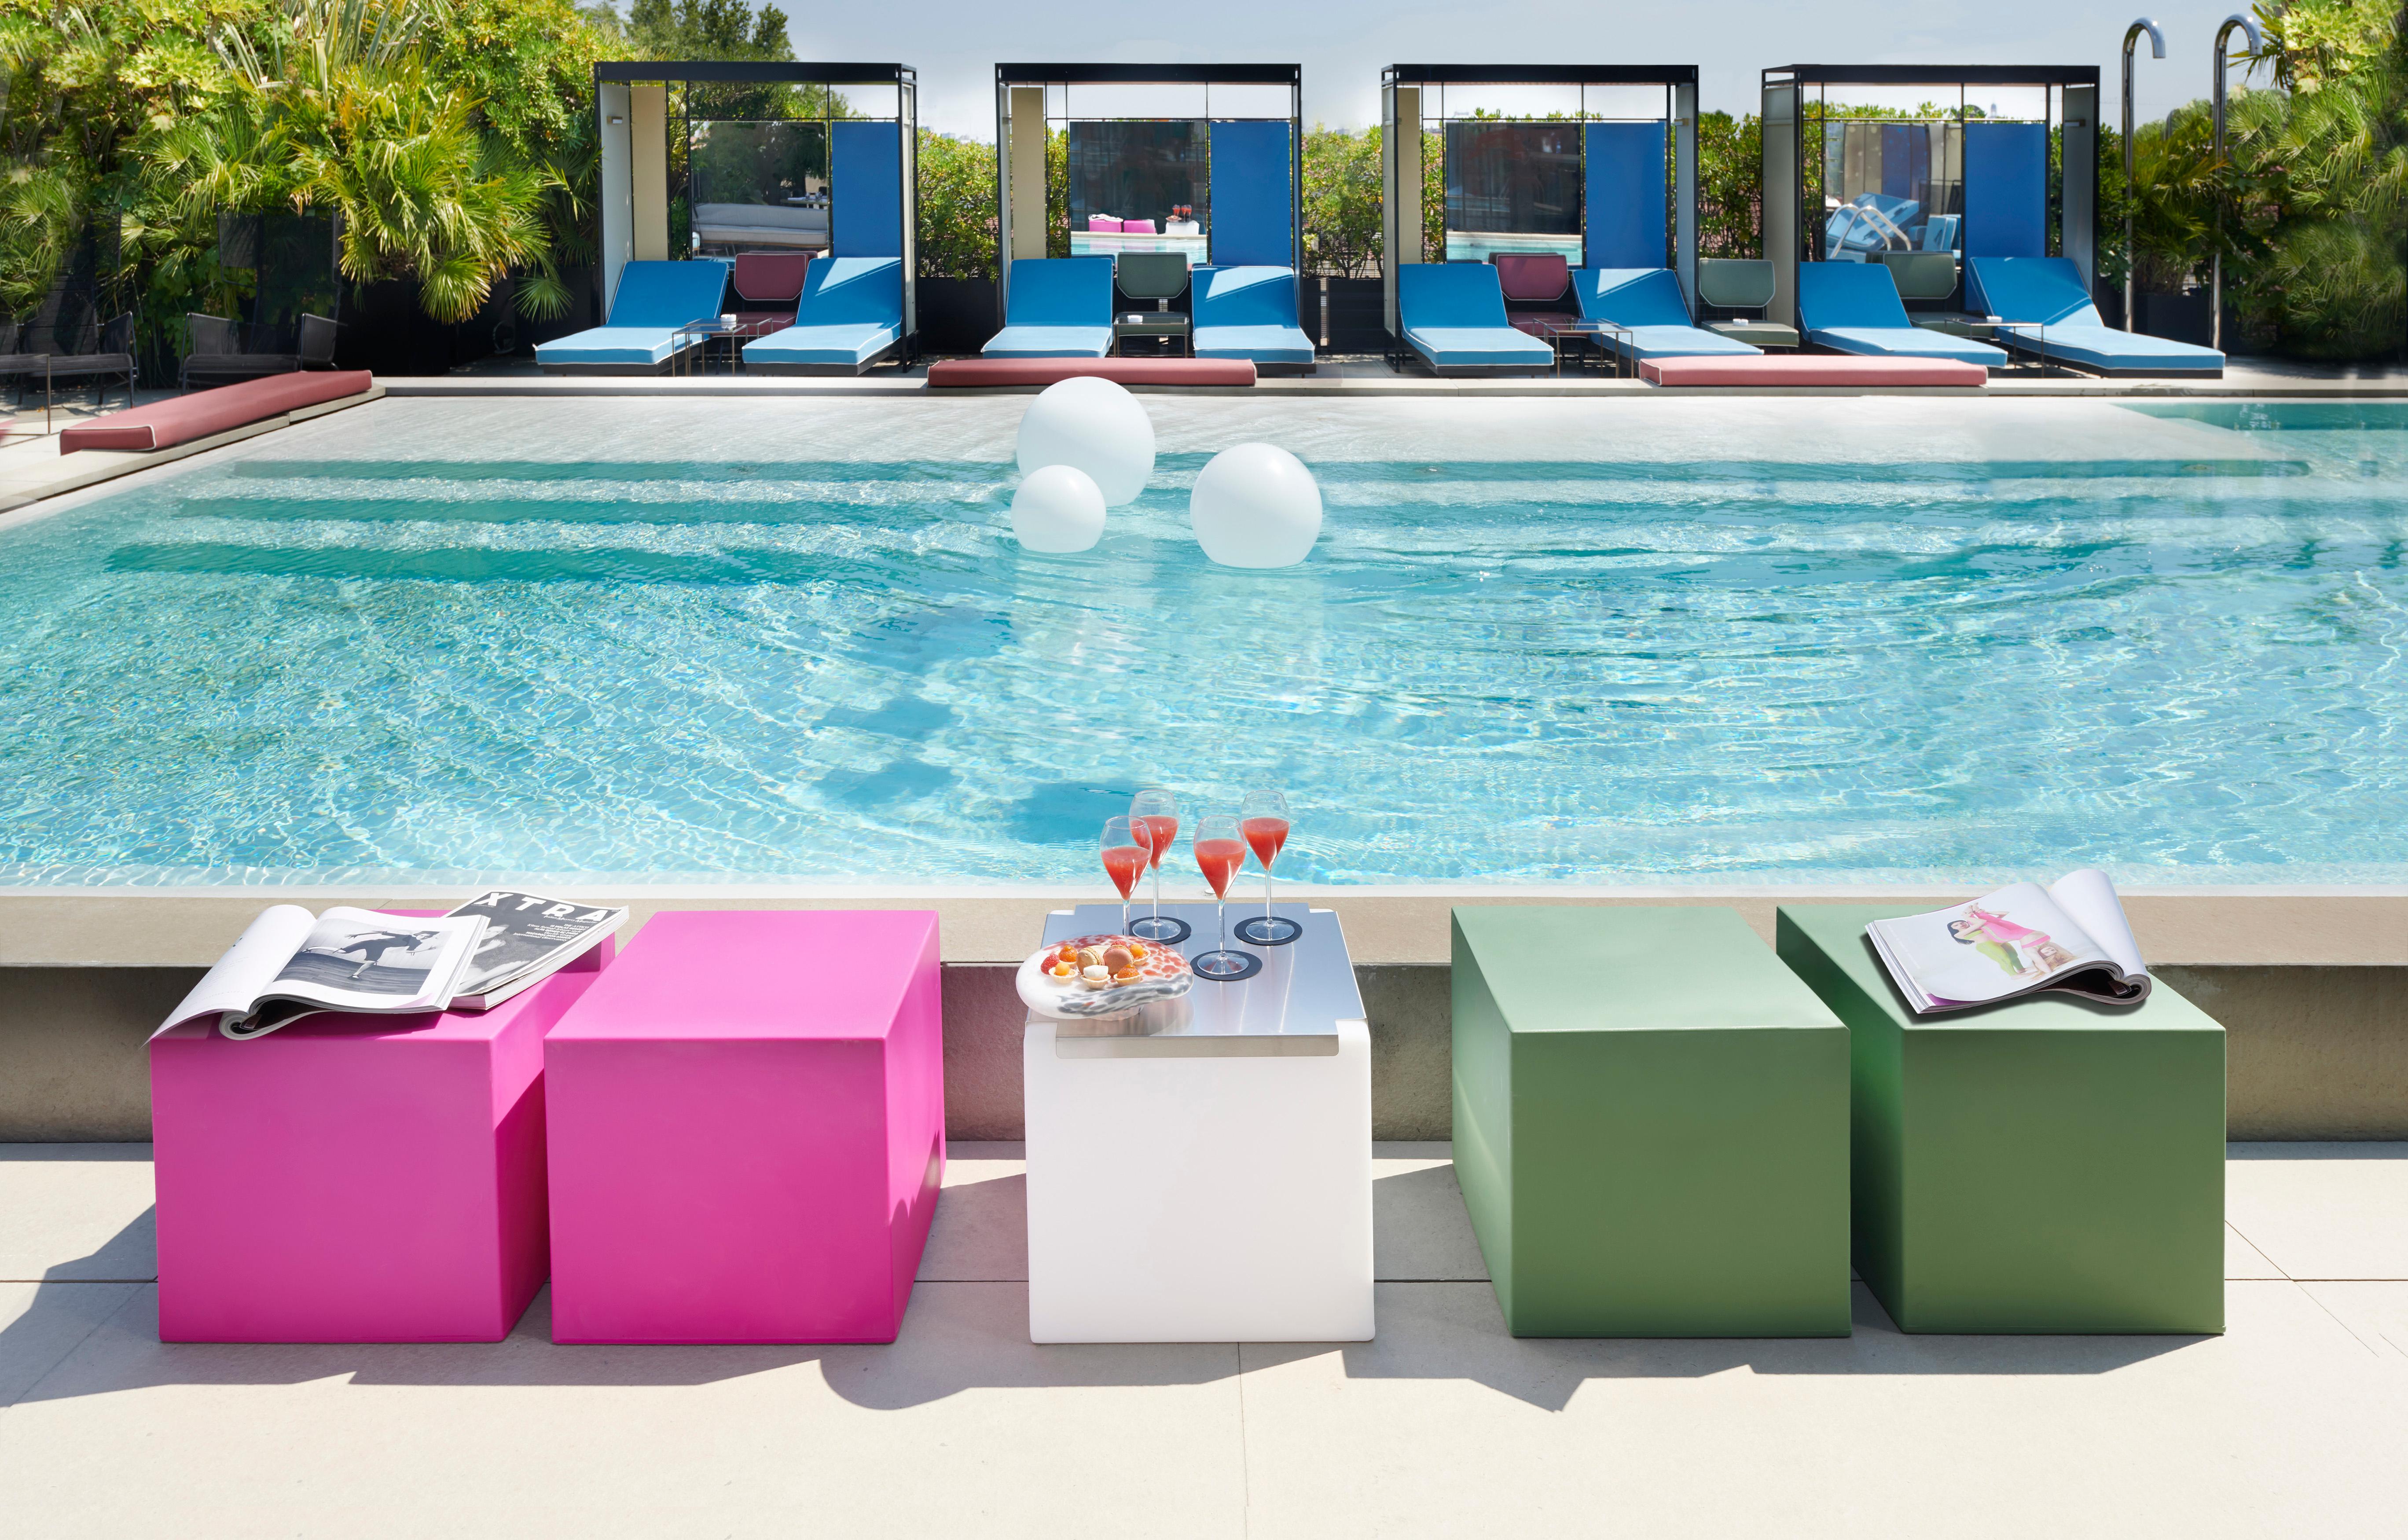 Elephant Grey Cubo Pouf Stool by SLIDE Studio
Dimensions: D 43 x W 43 x H 43 cm. 
Materials: Polyethylene.
Weight: 4 kg.

Available in different color options. This product is suitable for indoor and outdoor use. Available in different versions: